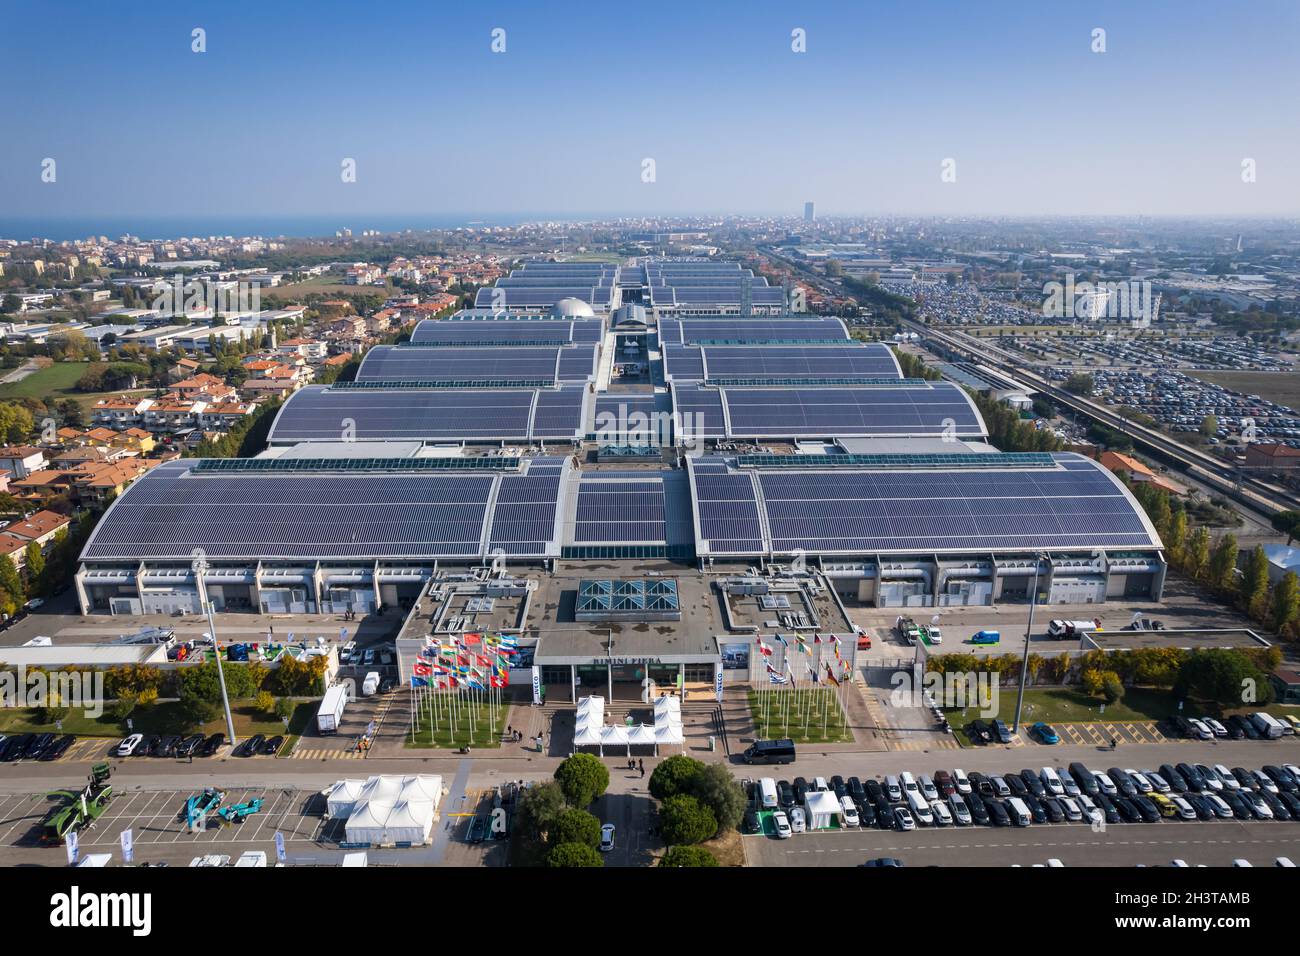 Aerial view of the roofs of the Rimini Fiera pavilions entirely covered with solar panels. Rimini, Italy - October 2021 Stock Photo